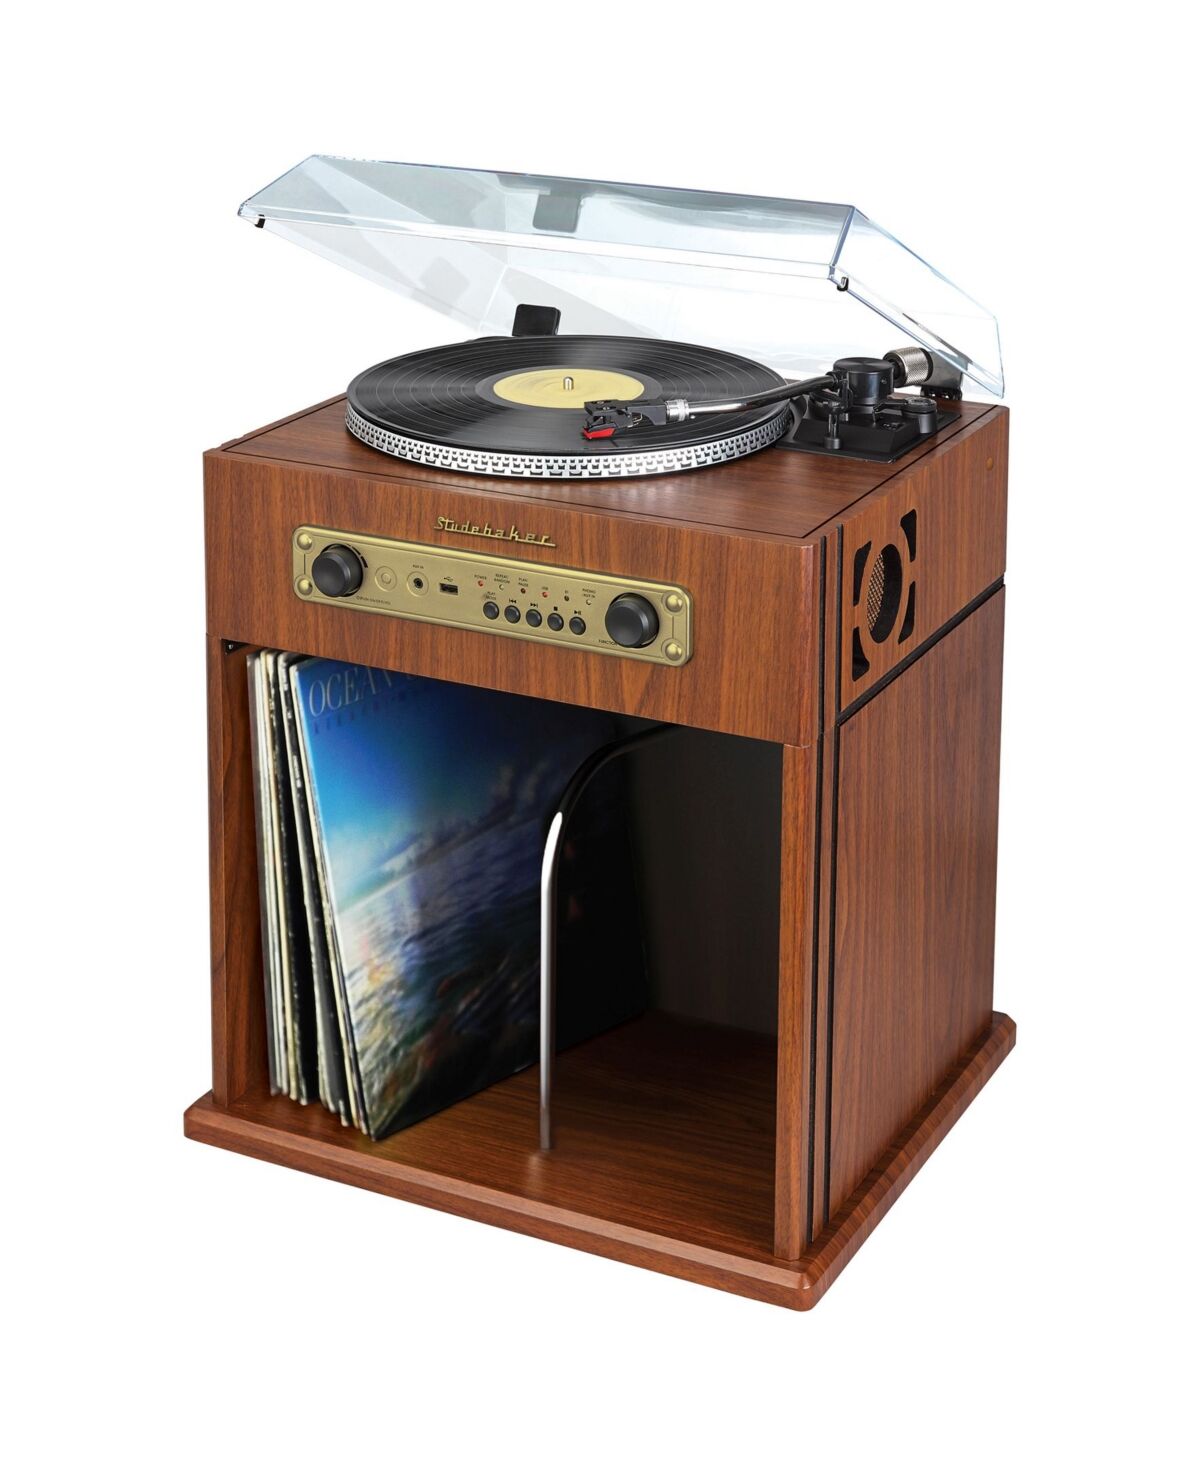 Studebaker SB6059 Stereo Turntable with Bluetooth Receiver and Record Storage Compartment - Woodgrain